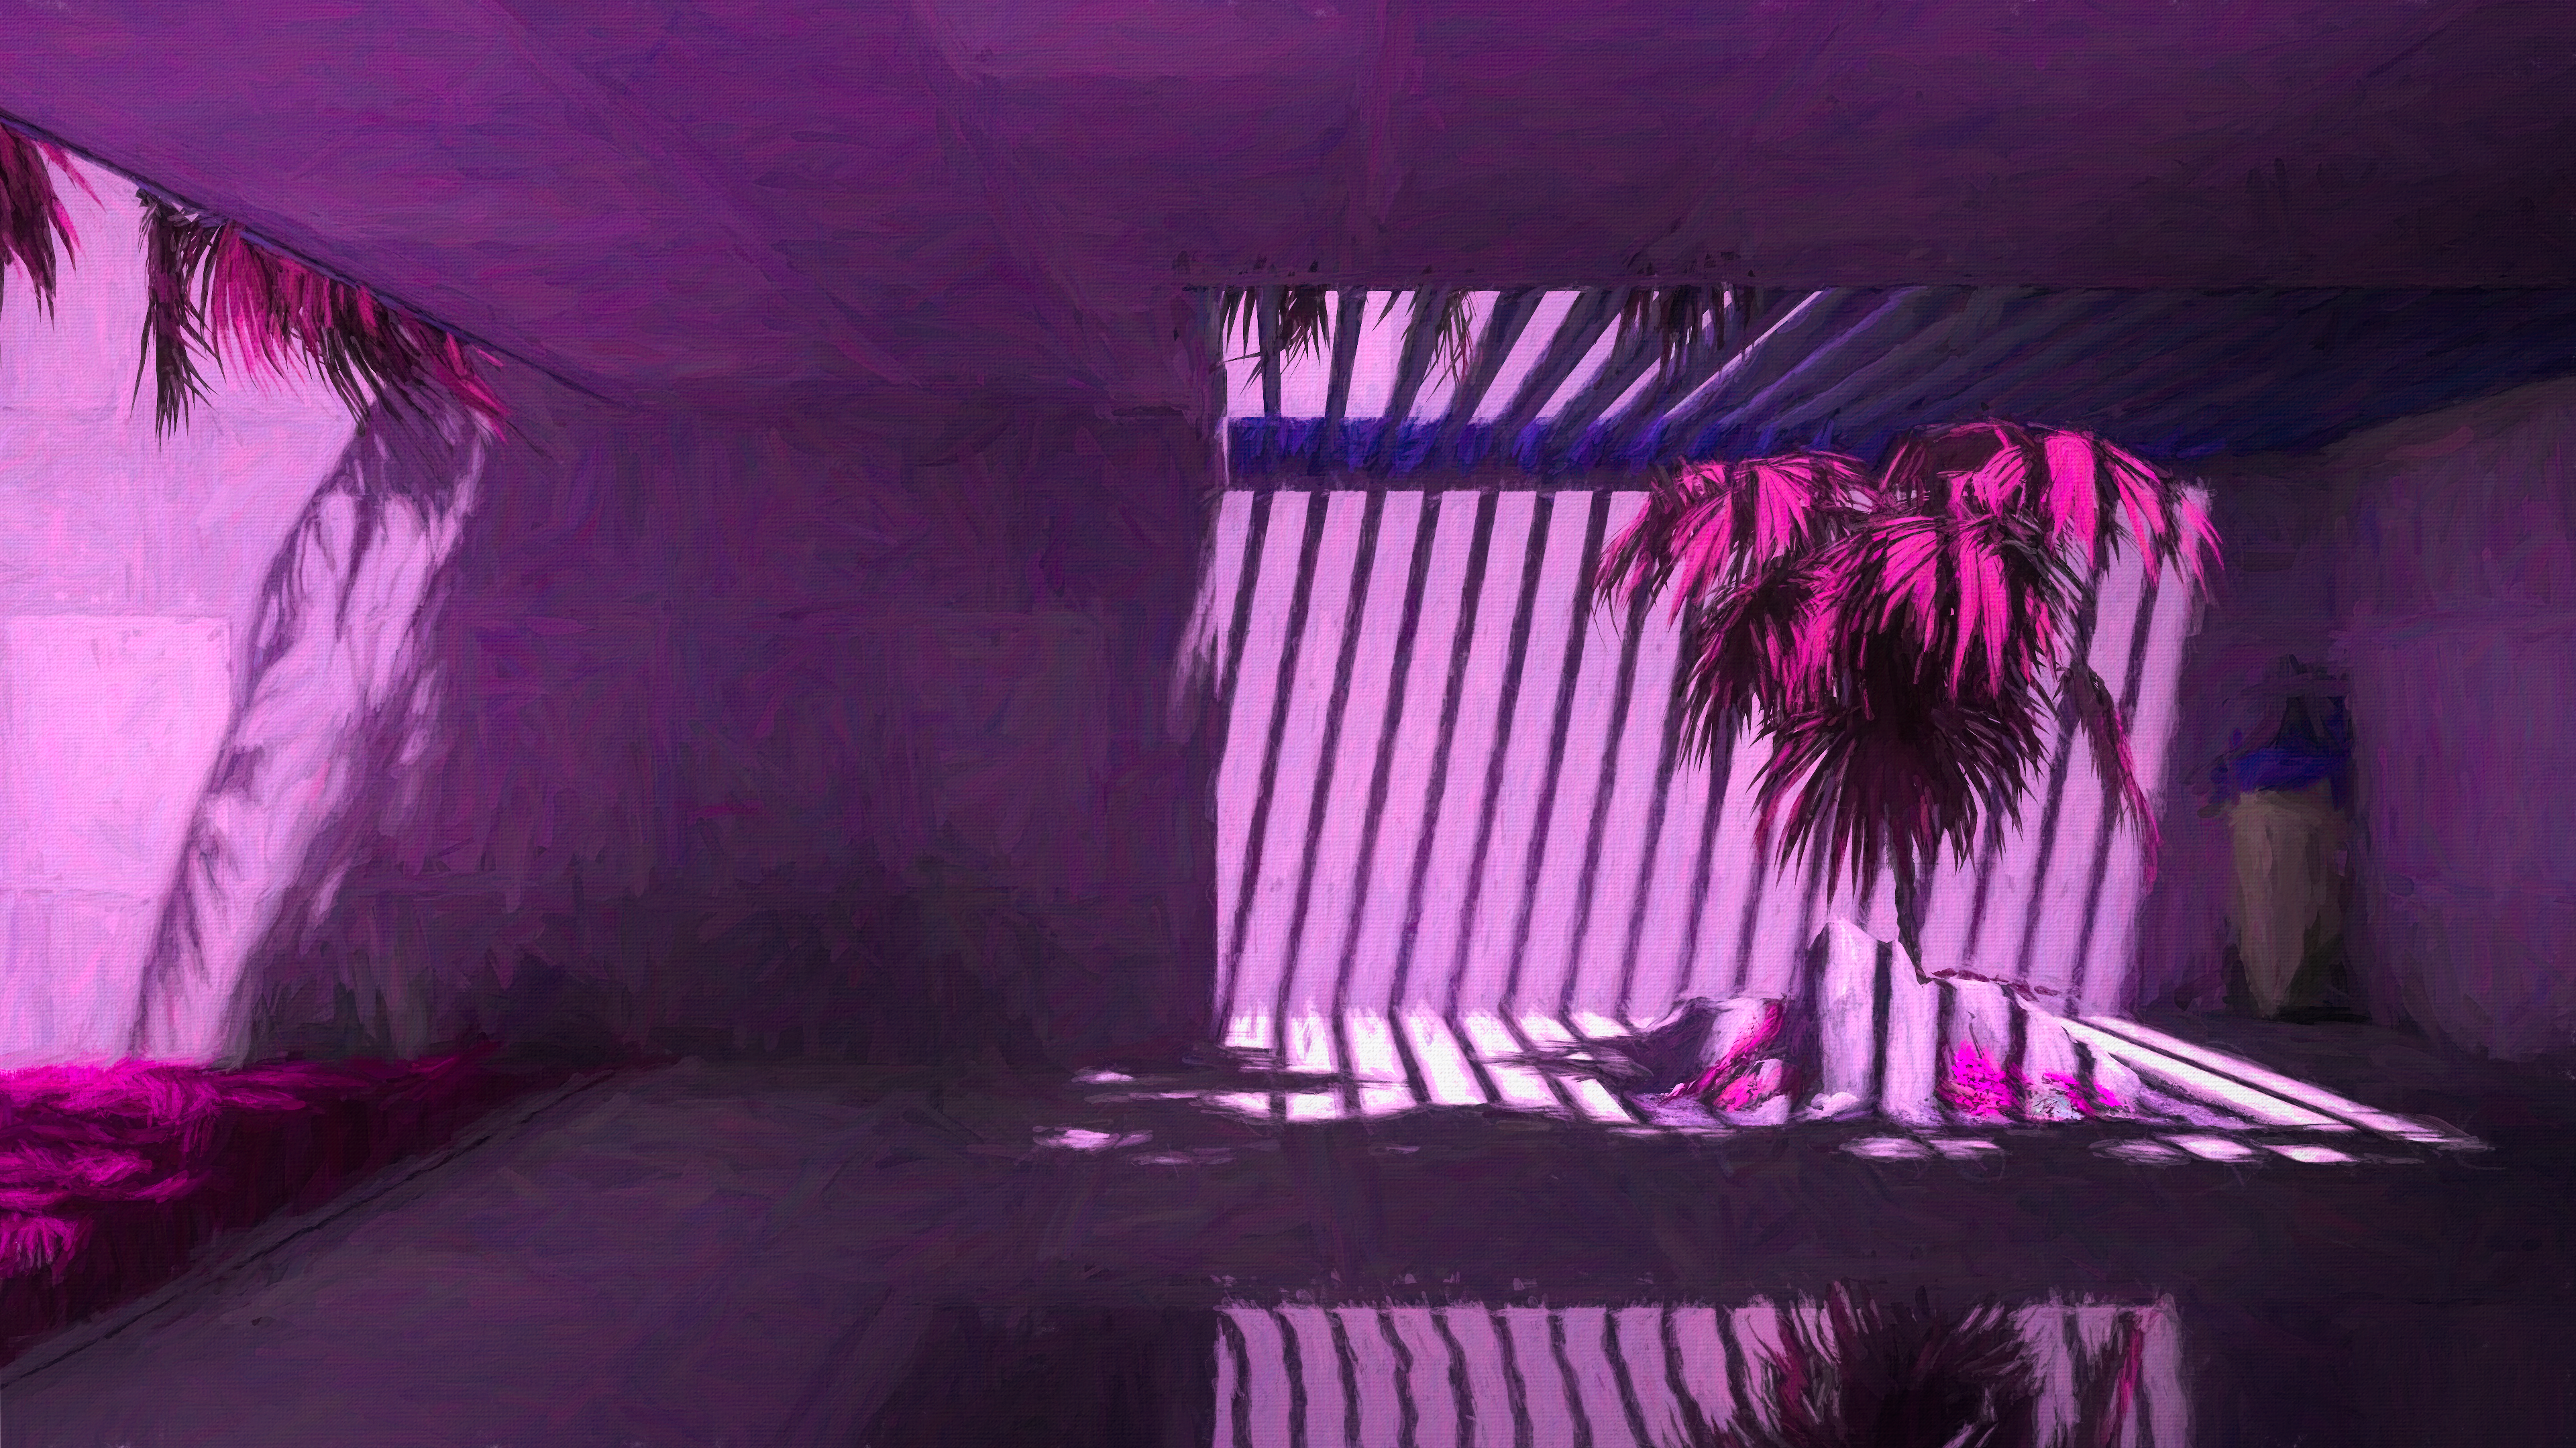 General 3840x2159 CGI digital art shaders artwork environment palm trees shadow pink background Girls Be Ambitious!